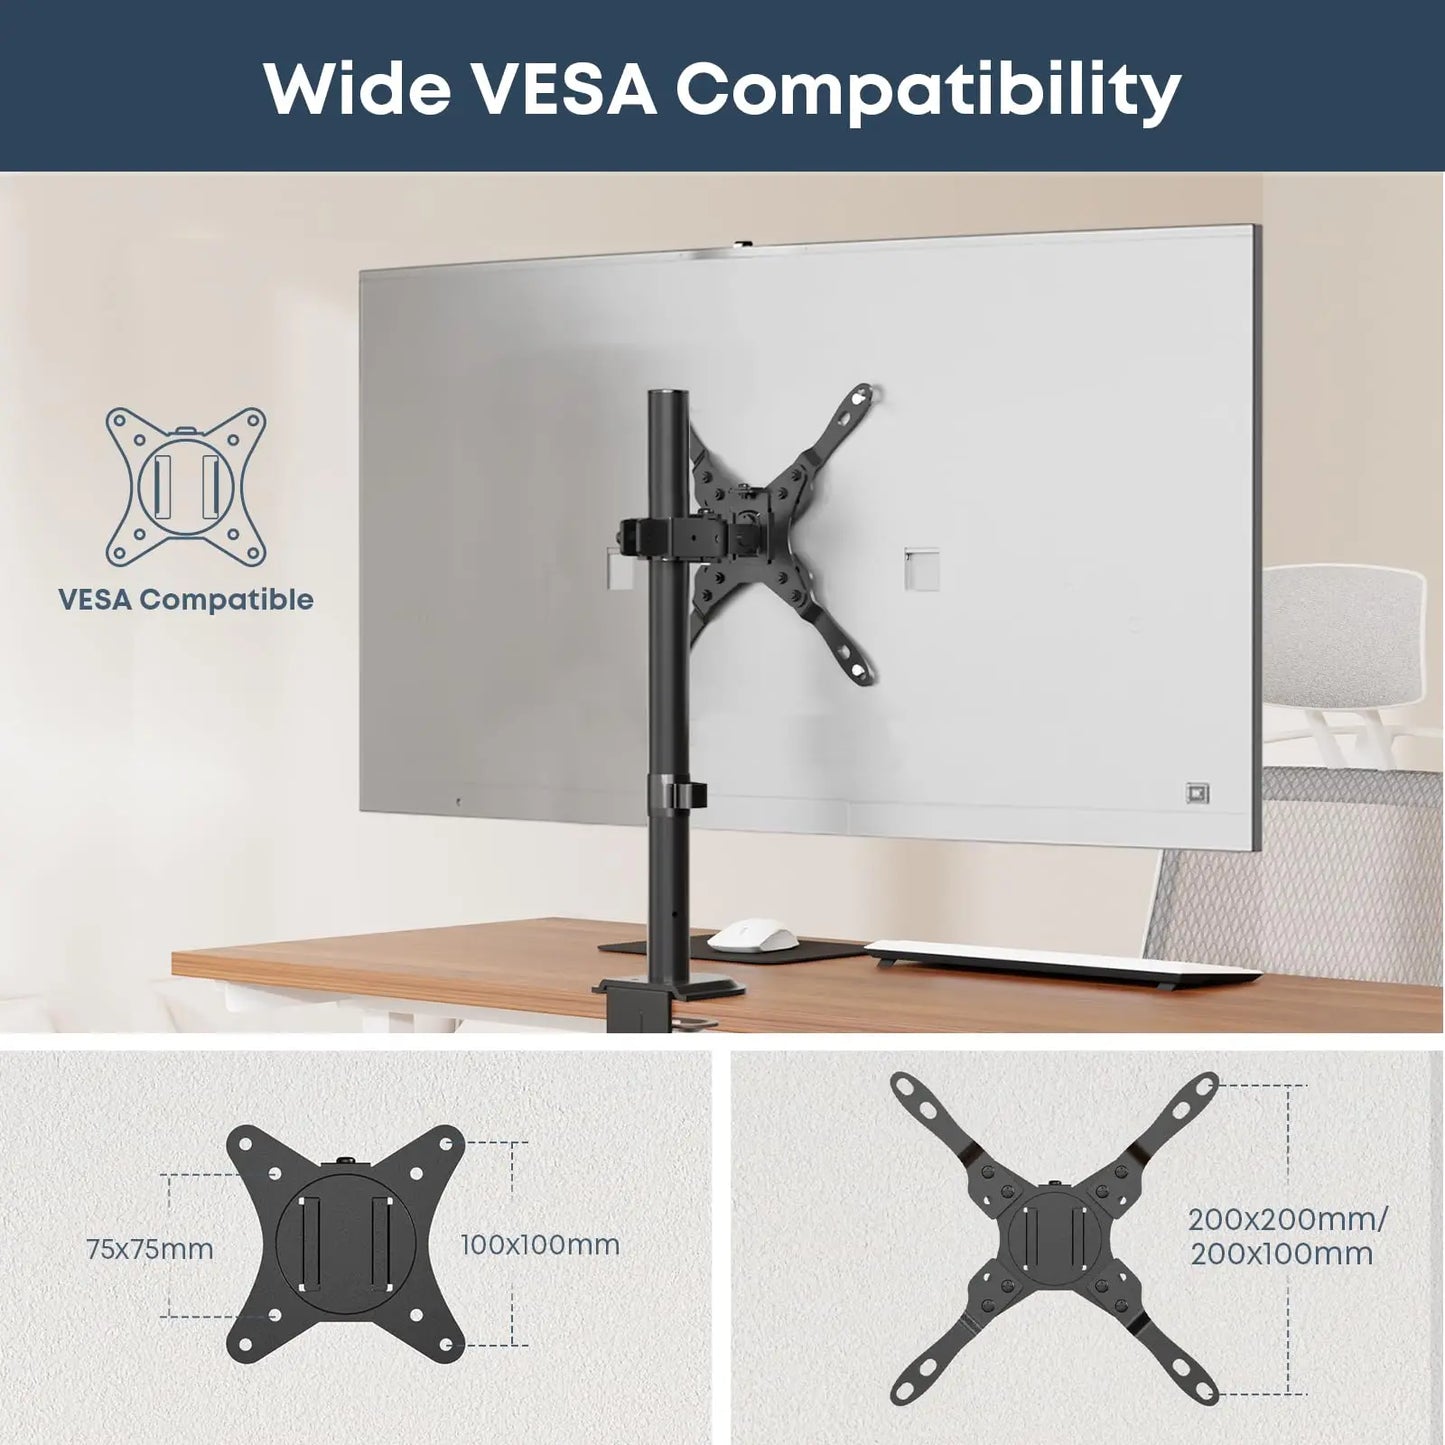 PUTORSEN Single Monitor Desk Mount for 17-42 Inch Monitor and TV, up to 26.4 lbs, Ultrawide Monitor Arm Mount for Flat Curved Computer & TV Screen with VESA 75×75 to 200×200, with Cable Clips PUTORSEN